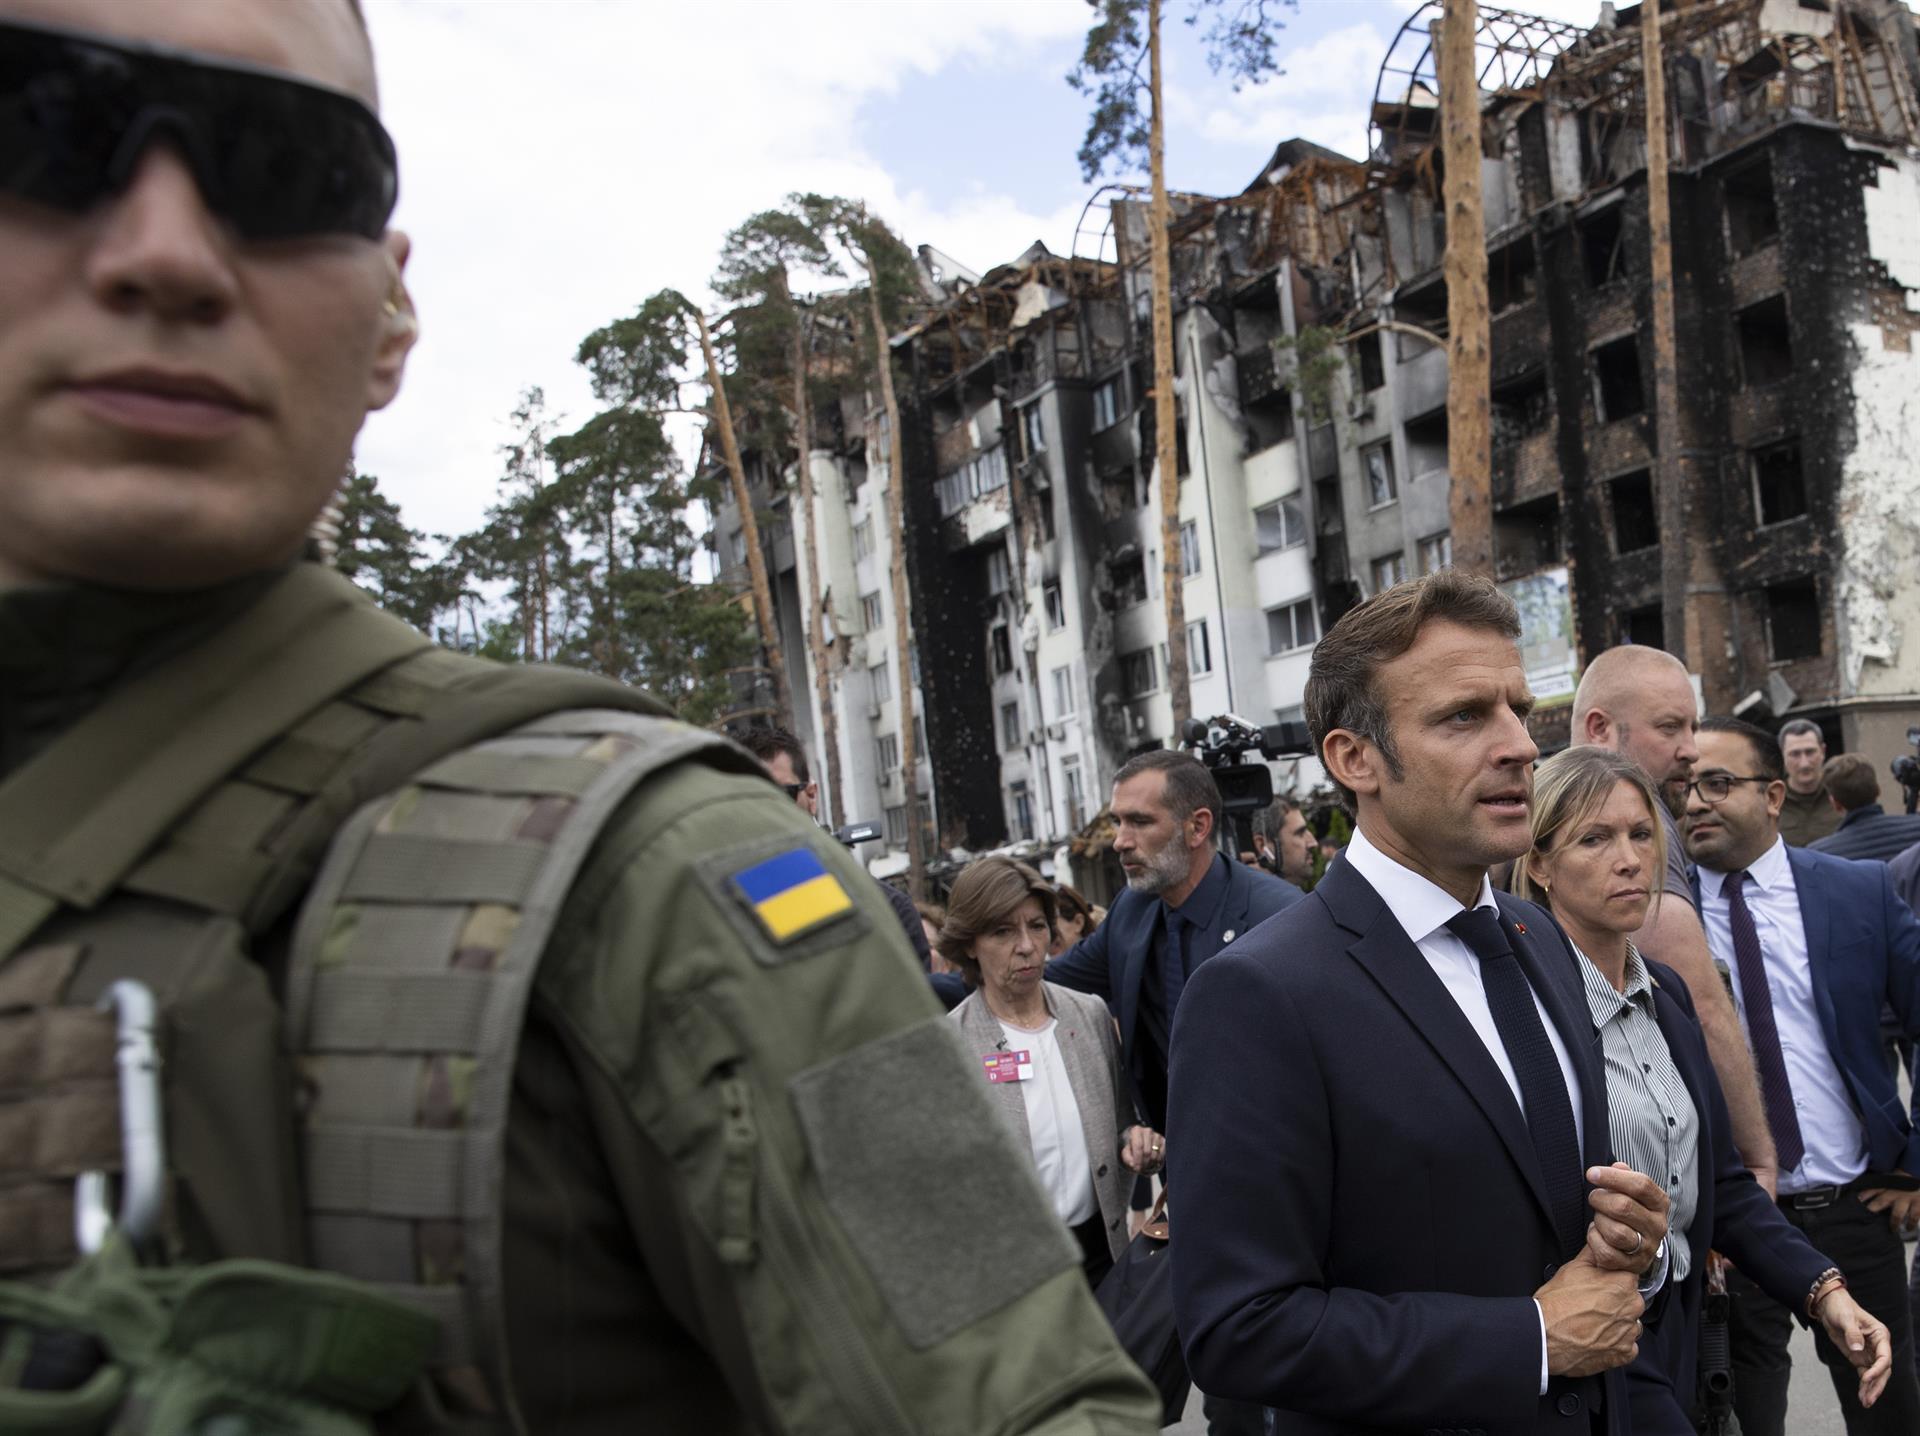 Leaders from Germany, France and Italy visit Ukraine to show their support